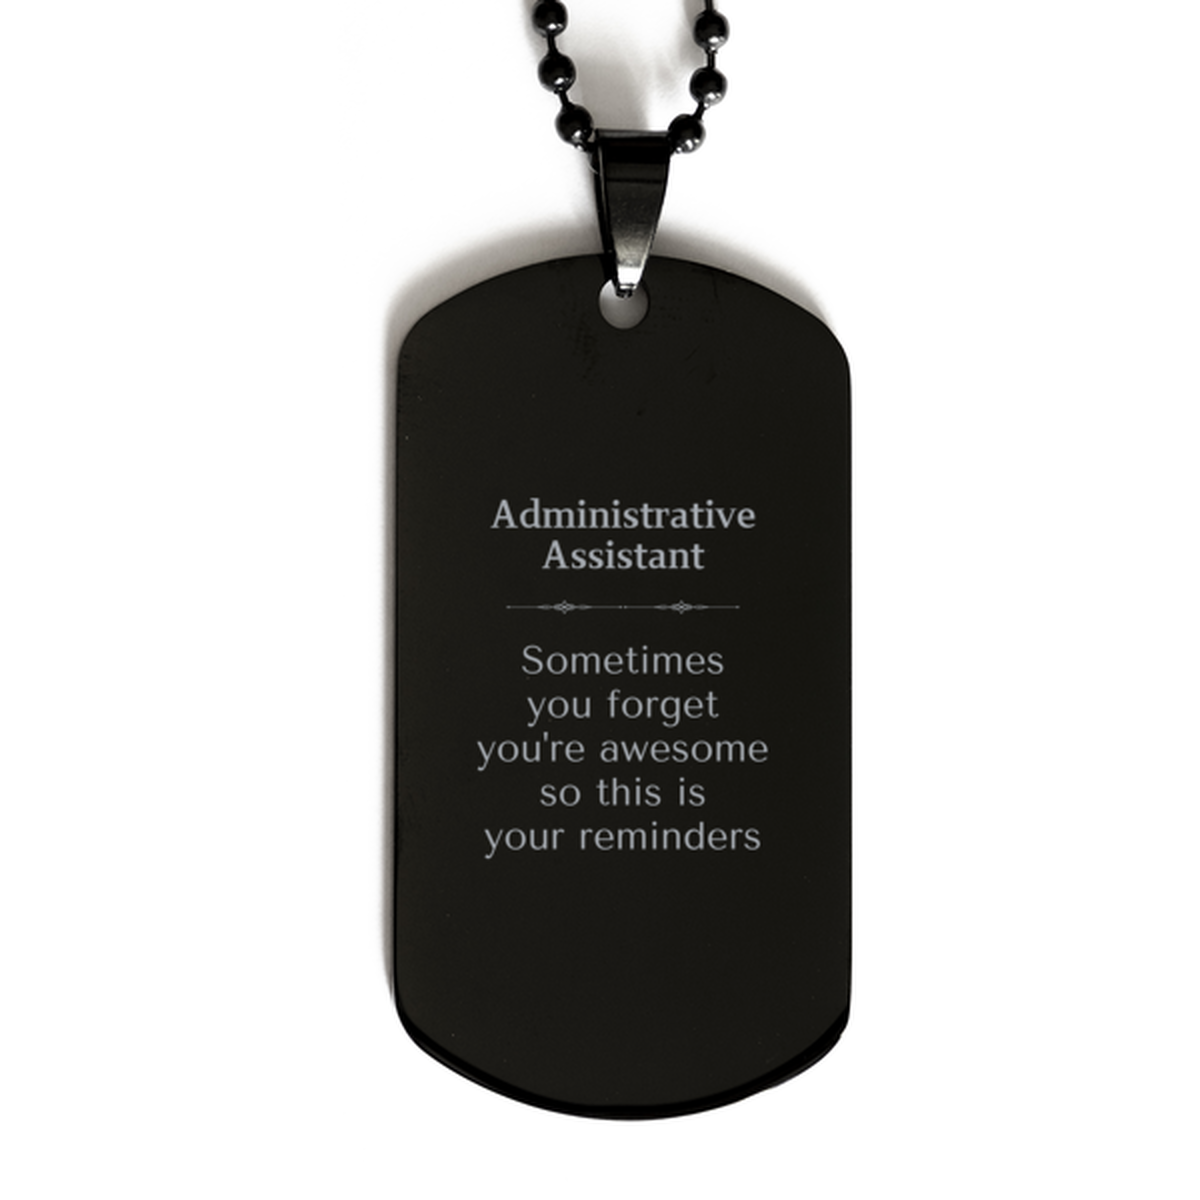 Sentimental Administrative Assistant Black Dog Tag, Administrative Assistant Sometimes you forget you're awesome so this is your reminders, Graduation Christmas Birthday Gifts for Administrative Assistant, Men, Women, Coworkers